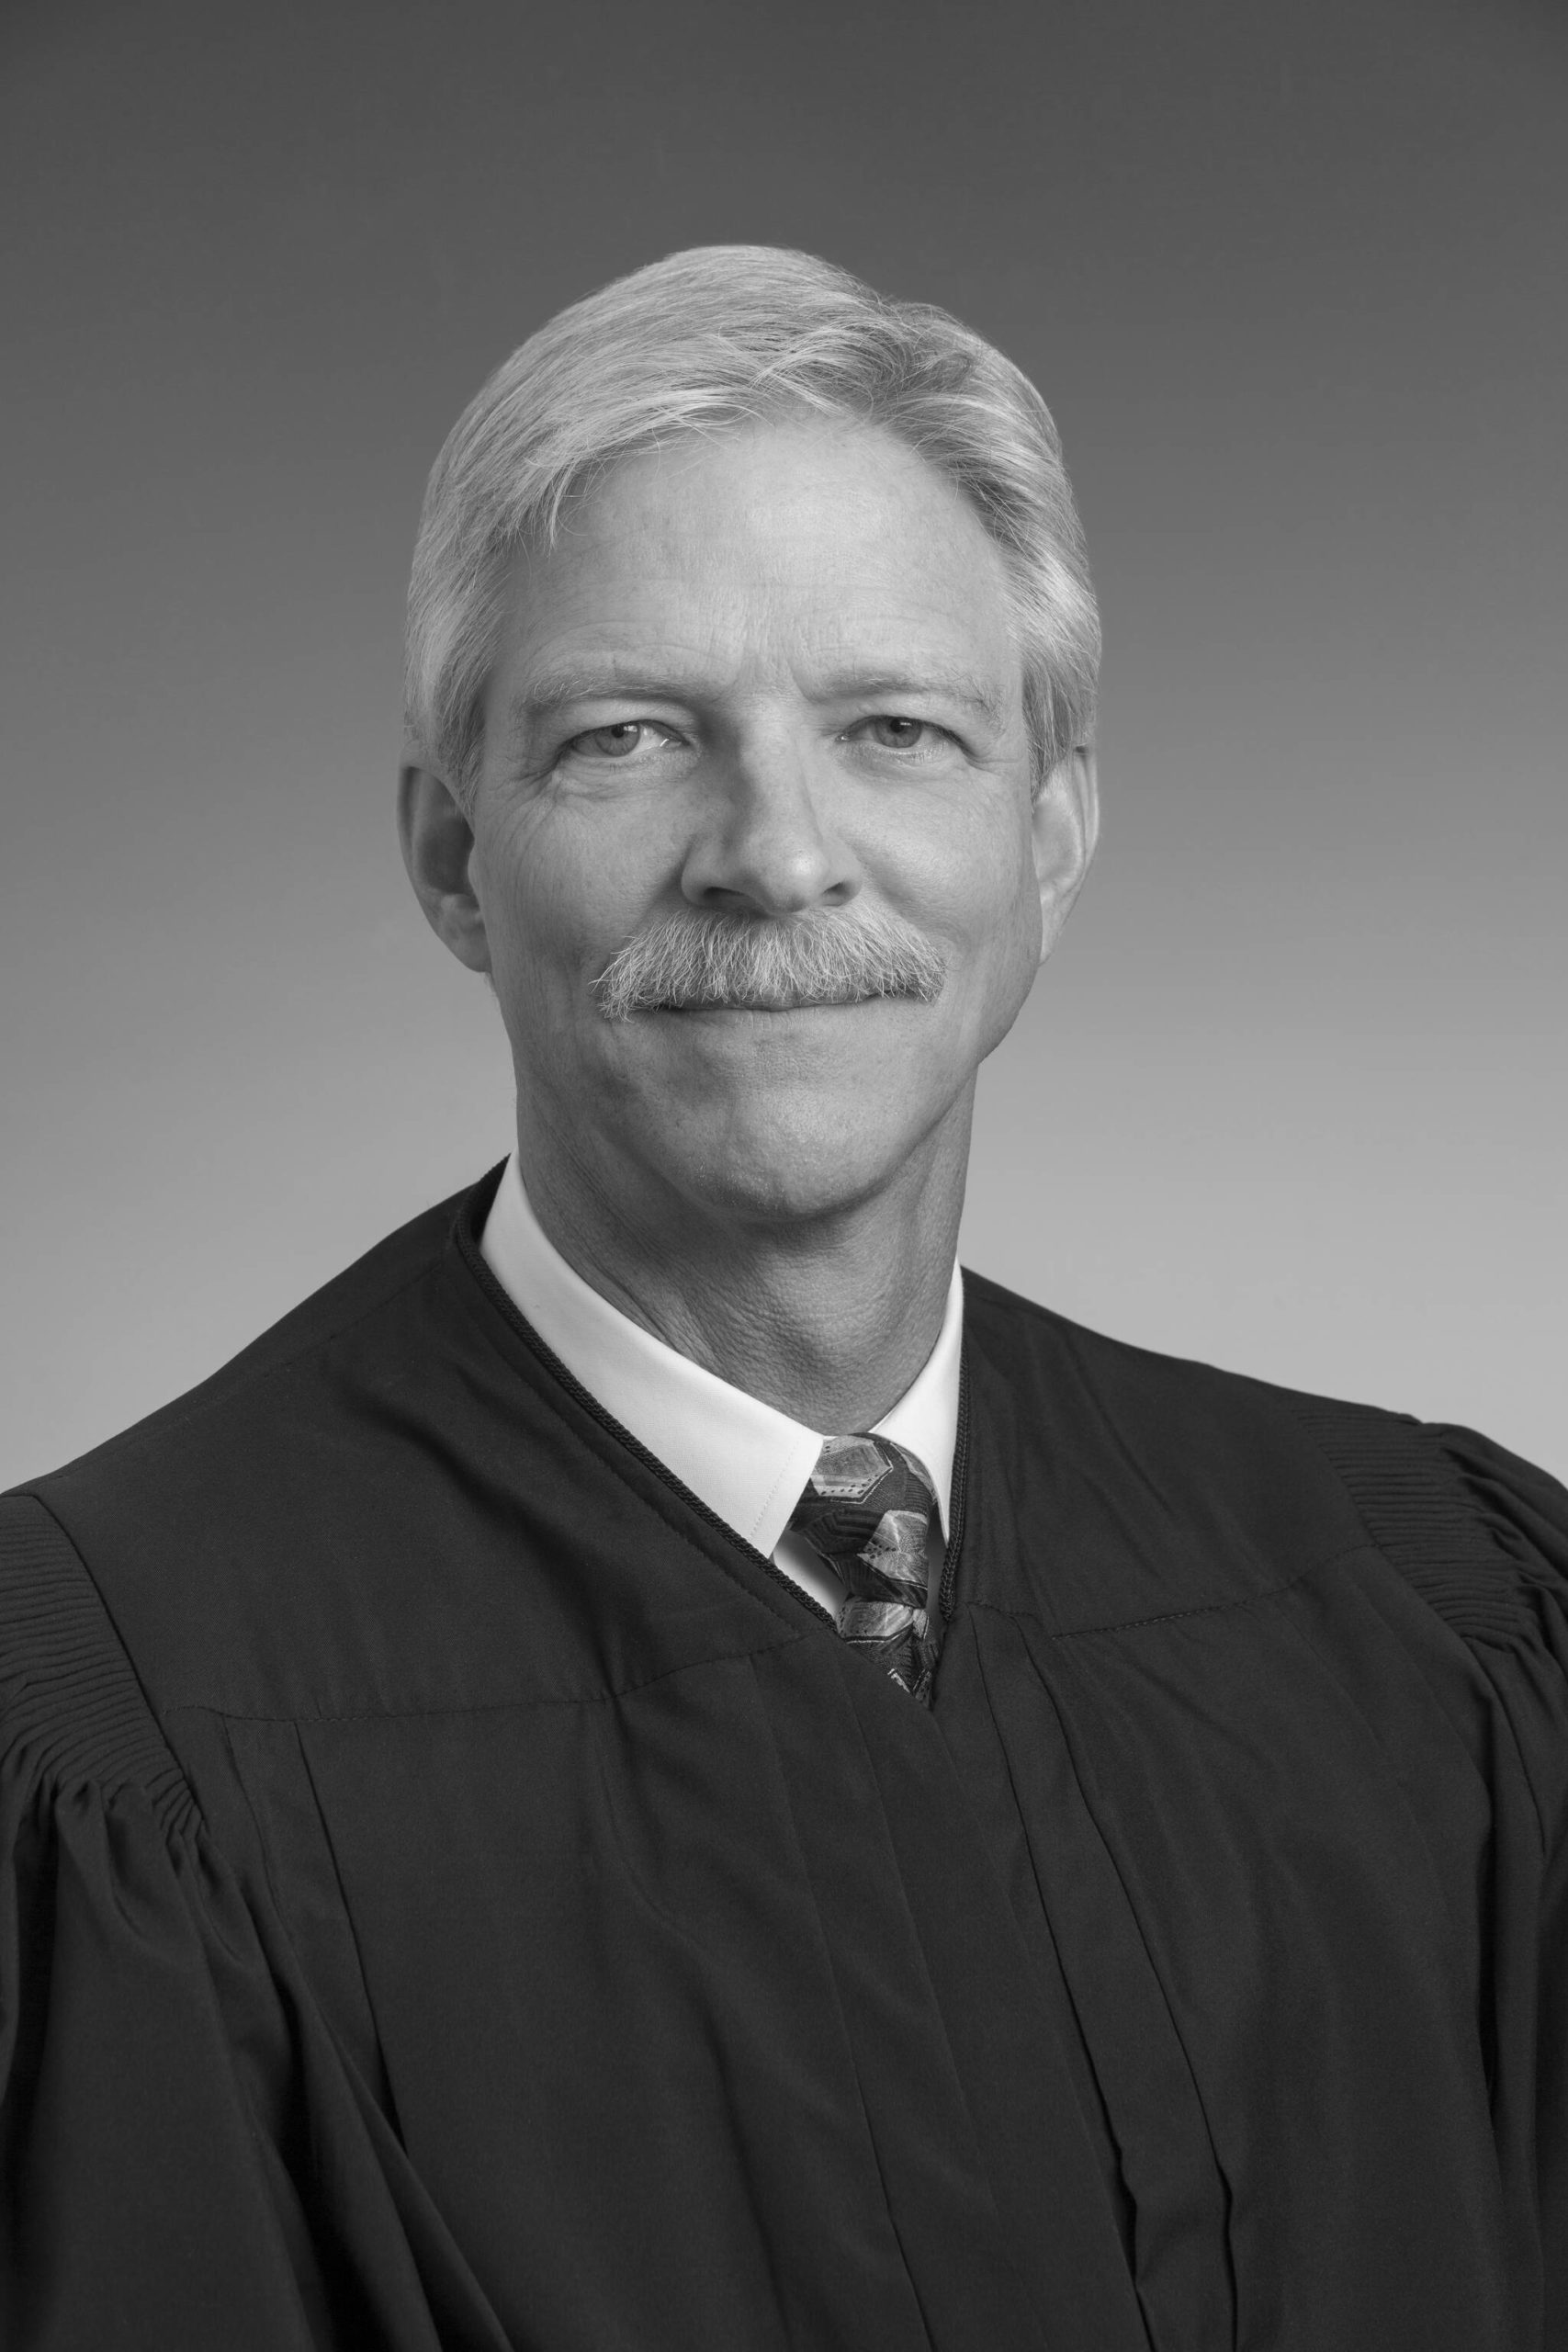 Alaska Supreme Court Justice Peter Maassen, appointed to the court in 2012, has been selected the next chief justice by his colleagues, the Alaska Court System announced Tuesday. (Credit: Alaska Court System)